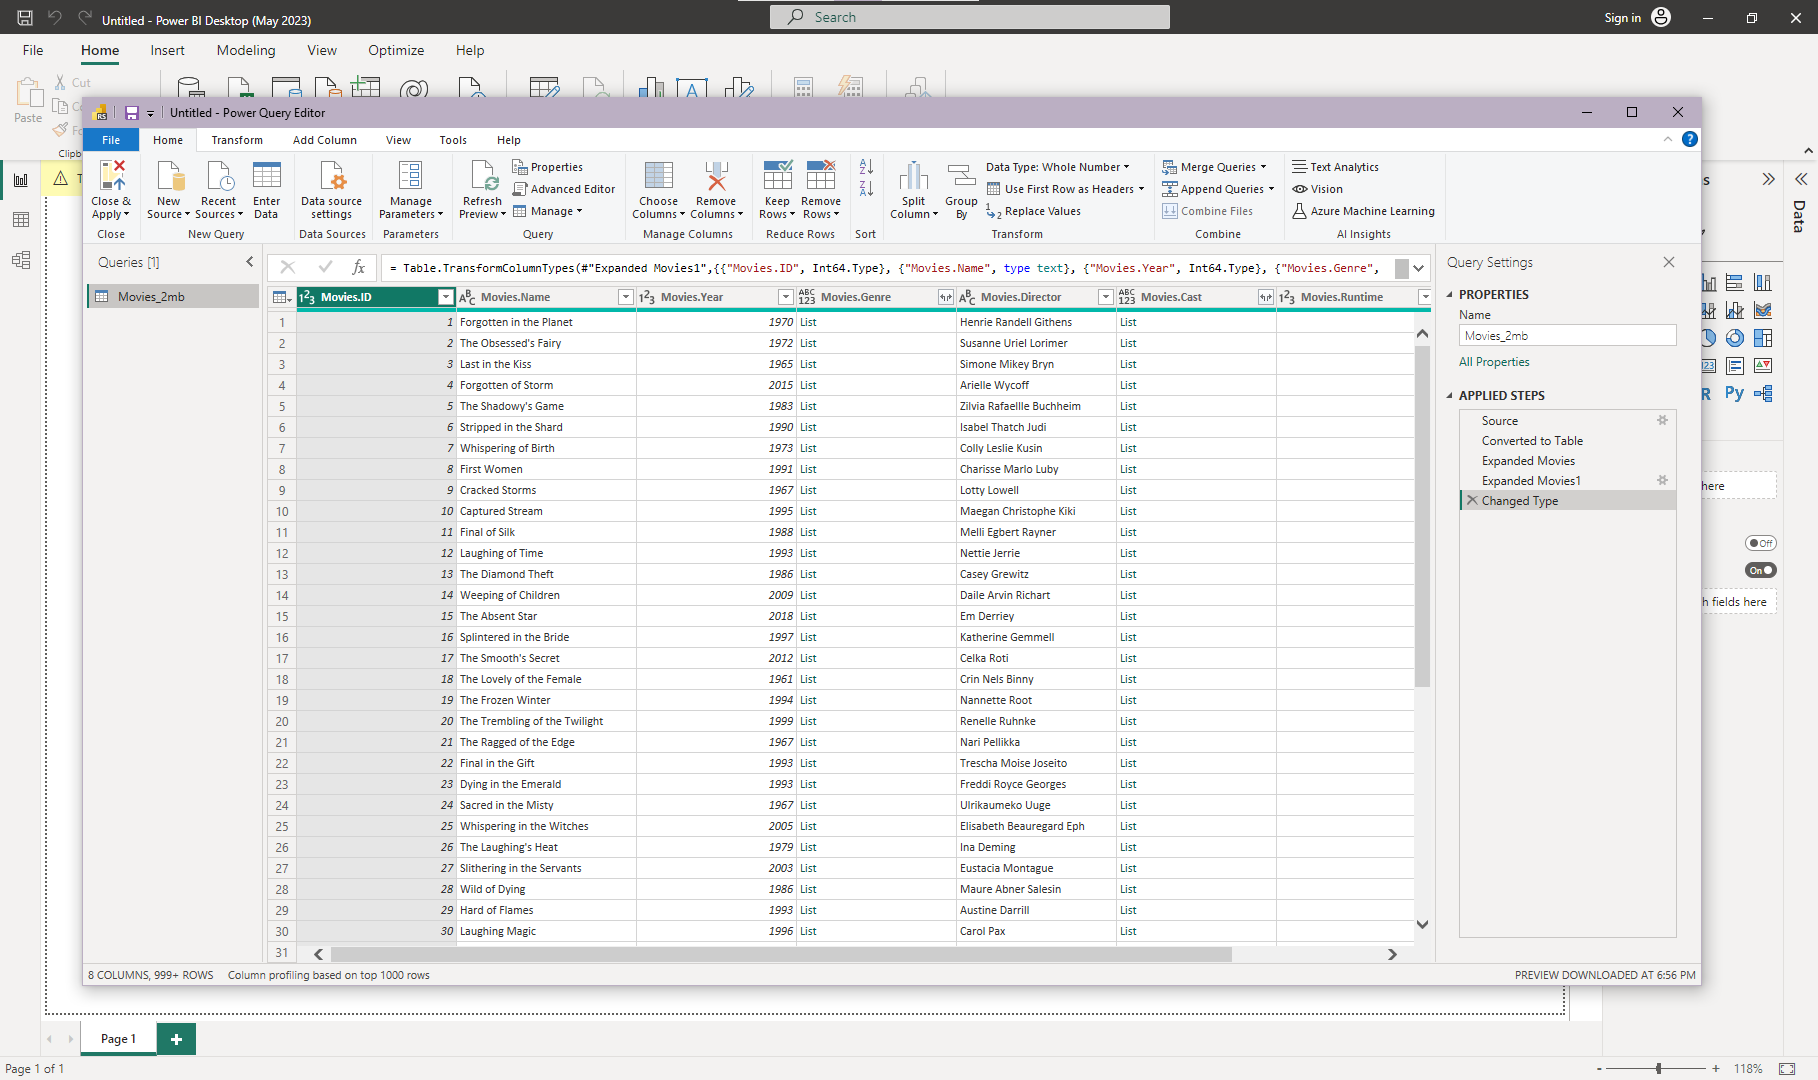 Snapshot of the movie JSON data file displayed as a table in the Microsoft Power BI application’s interface.